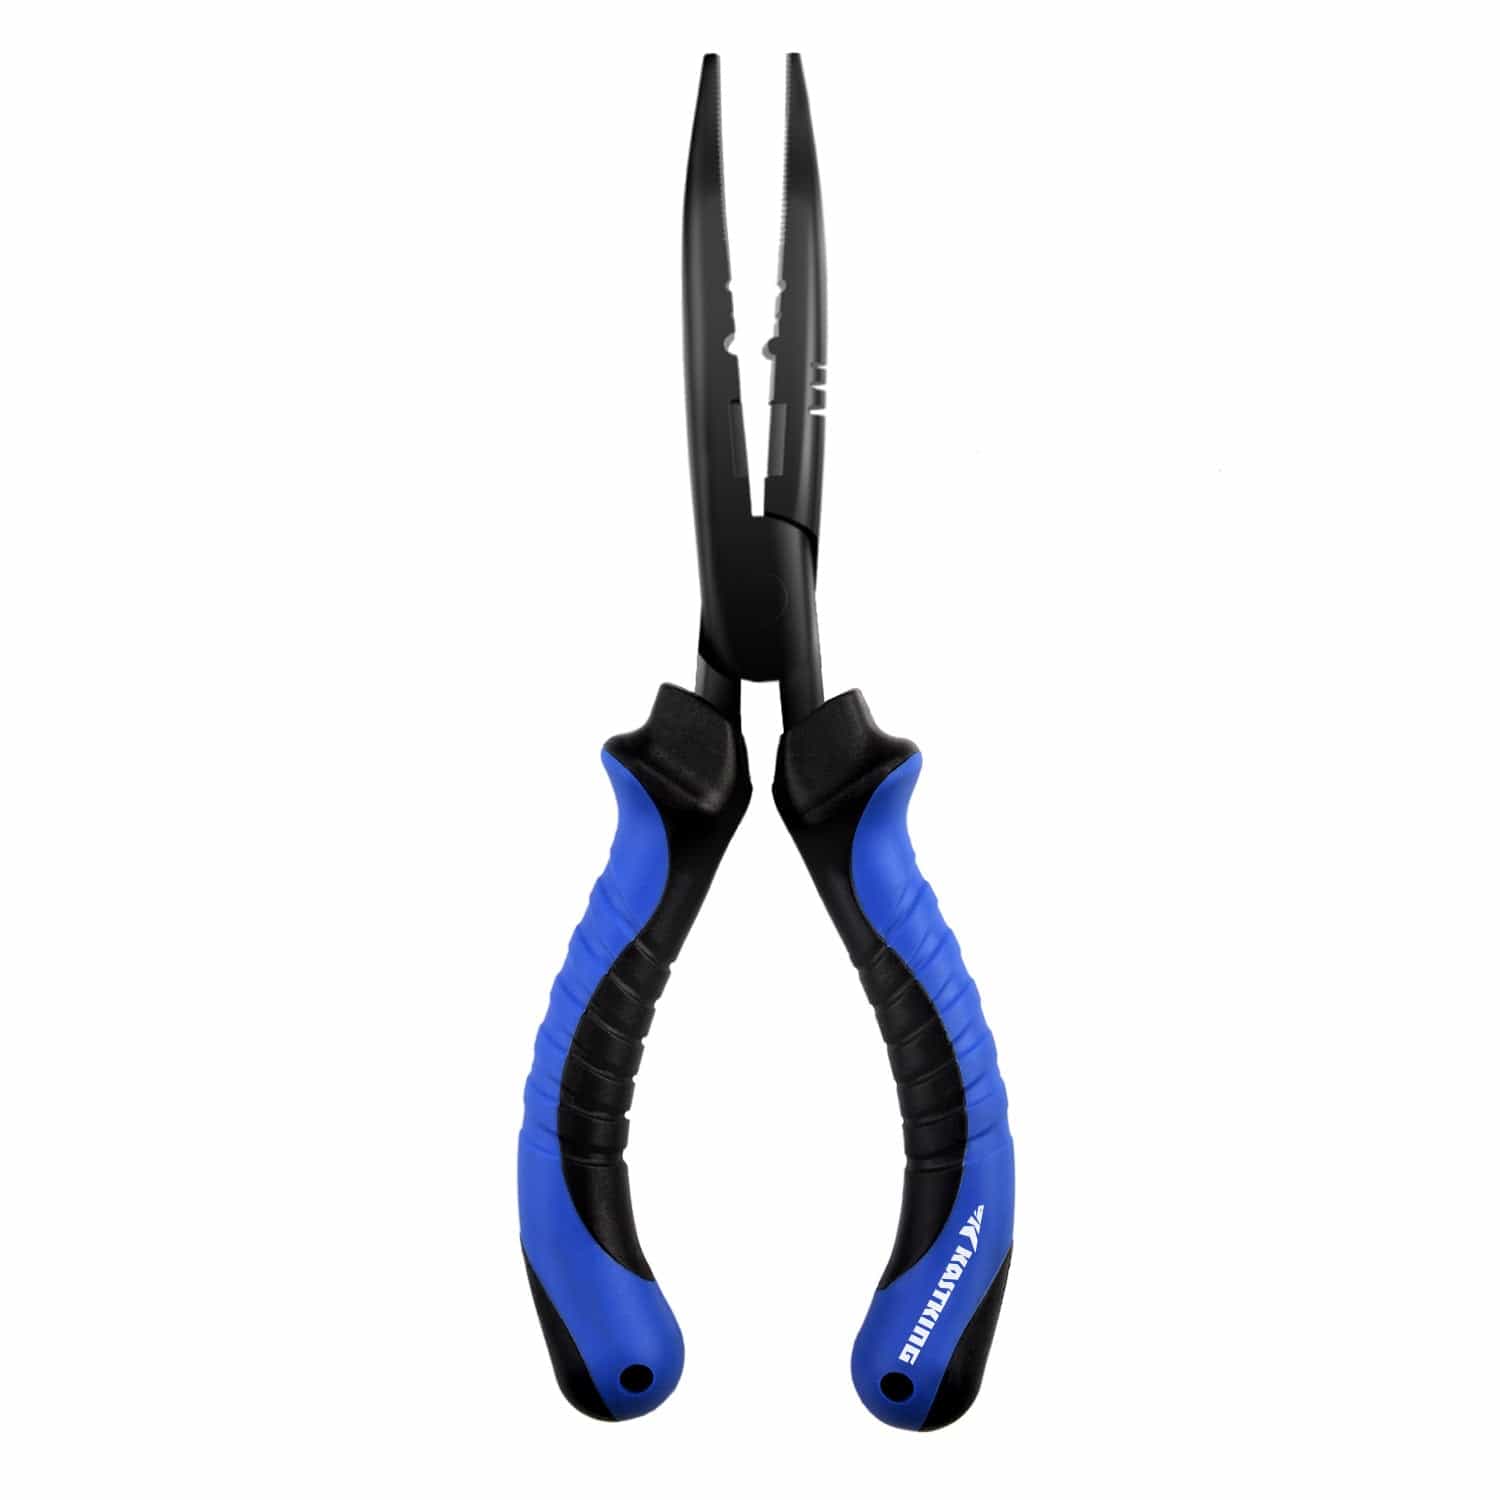 5 Steps To Quickly Replace Treble Hooks With Split Ring Pliers [VIDEO]